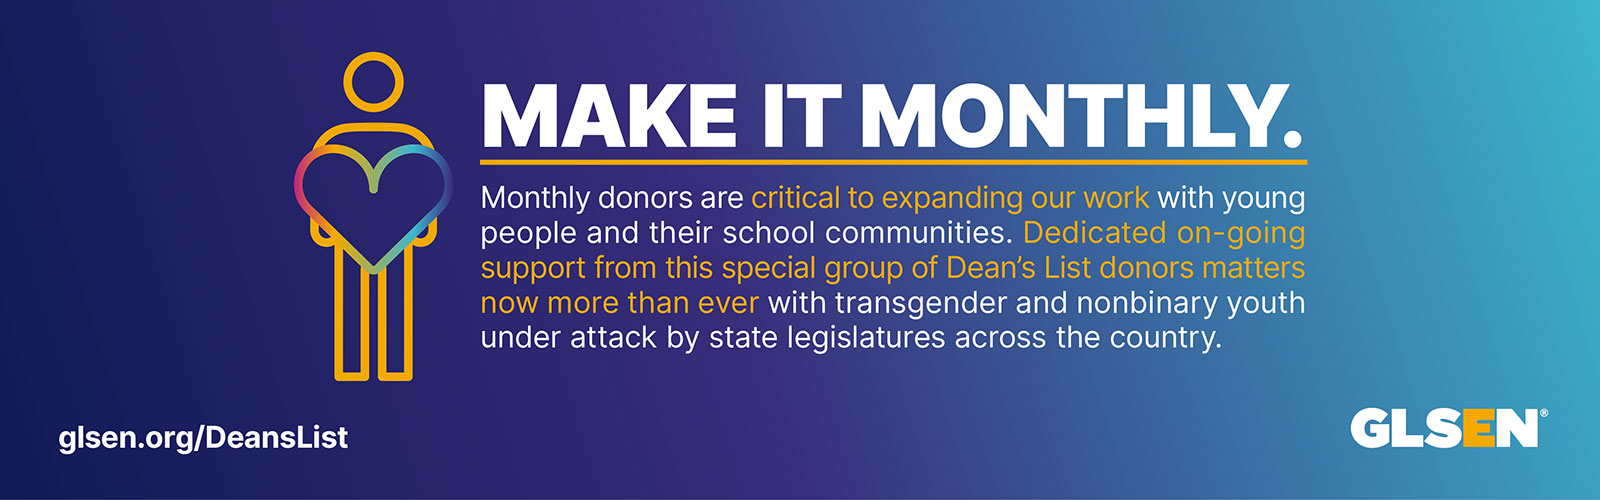 The text reads, "Make it monthly. Monthly donors are critical to expanding our work with young people and their school communities. Dedicated on-going support from this special group of donors matters now more than ever with transgender and nonbinary youth under attack by state legislatures across the country.